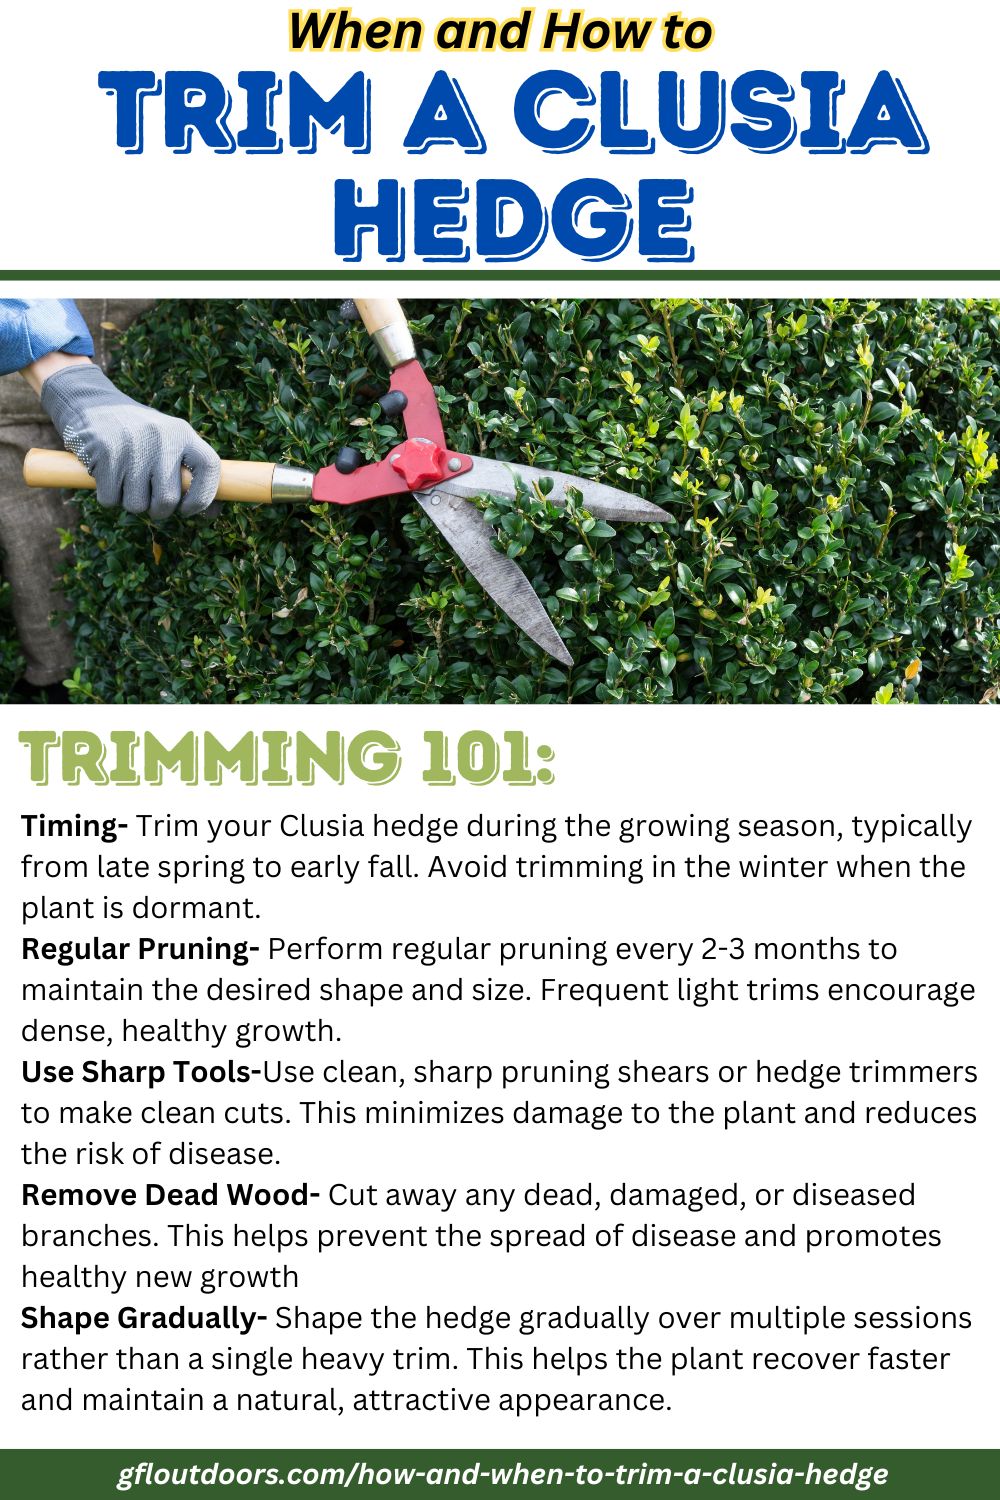 Text based infographic with the following text: Timing- Trim your Clusia hedge during the growing season, typically from late spring to early fall. Avoid trimming in the winter when the plant is dormant. Regular Pruning- Perform regular pruning every 2-3 months to maintain the desired shape and size. Frequent light trims encourage dense, healthy growth. Use Sharp Tools-Use clean, sharp pruning shears or hedge trimmers to make clean cuts. This minimizes damage to the plant and reduces the risk of disease. Remove Dead Wood- Cut away any dead, damaged, or diseased branches. This helps prevent the spread of disease and promotes healthy new growth Shape Gradually- Shape the hedge gradually over multiple sessions rather than a single heavy trim. This helps the plant recover faster and maintain a natural, attractive appearance.